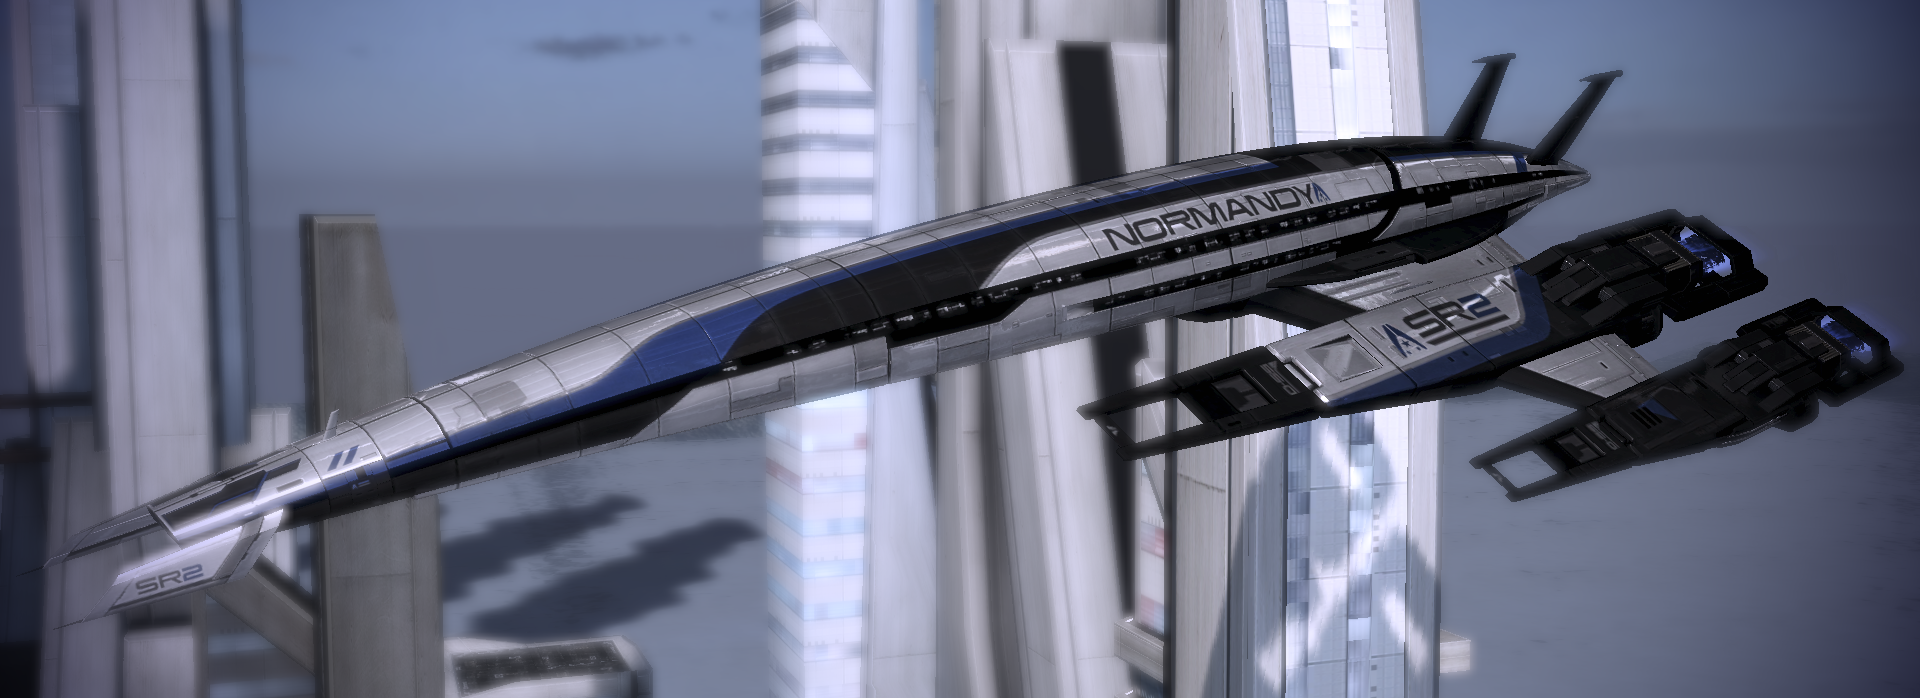 Normandy_SR2_Alliance_Livery.png